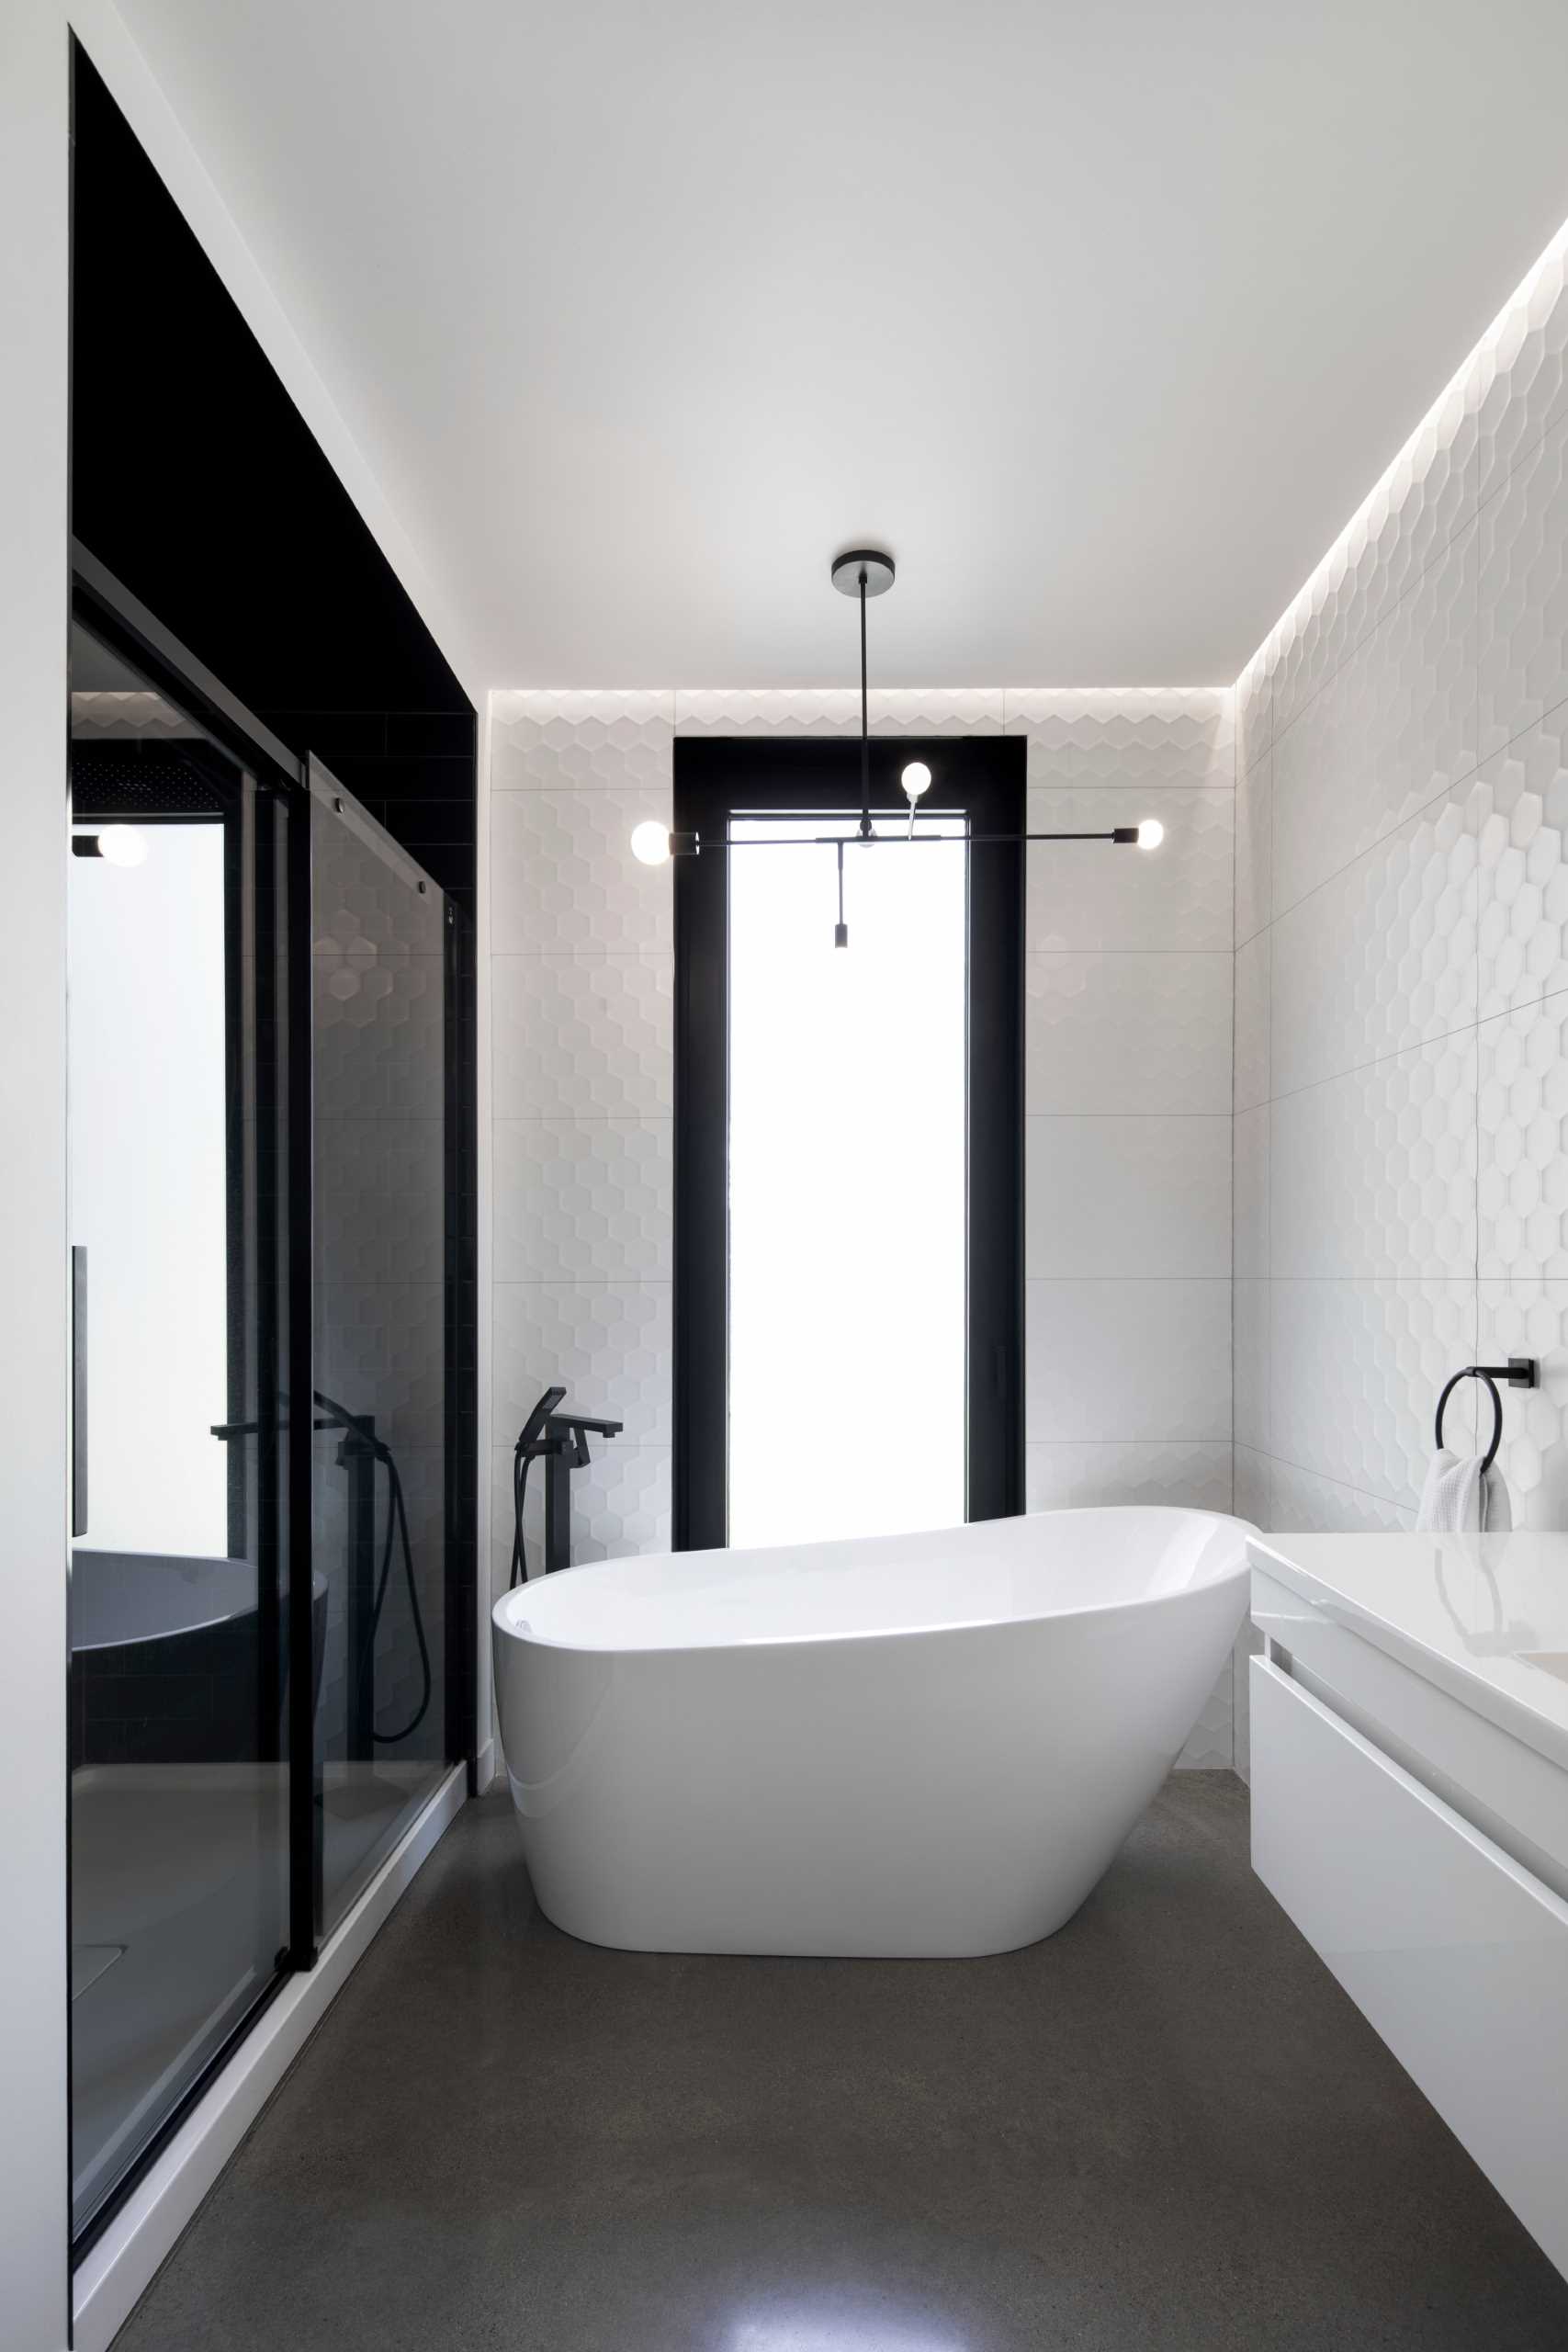 Floor-to-ceiling tiled walls add a textural element to this modern bathroom, which also includes a freestanding bathtub and a walk-in shower.